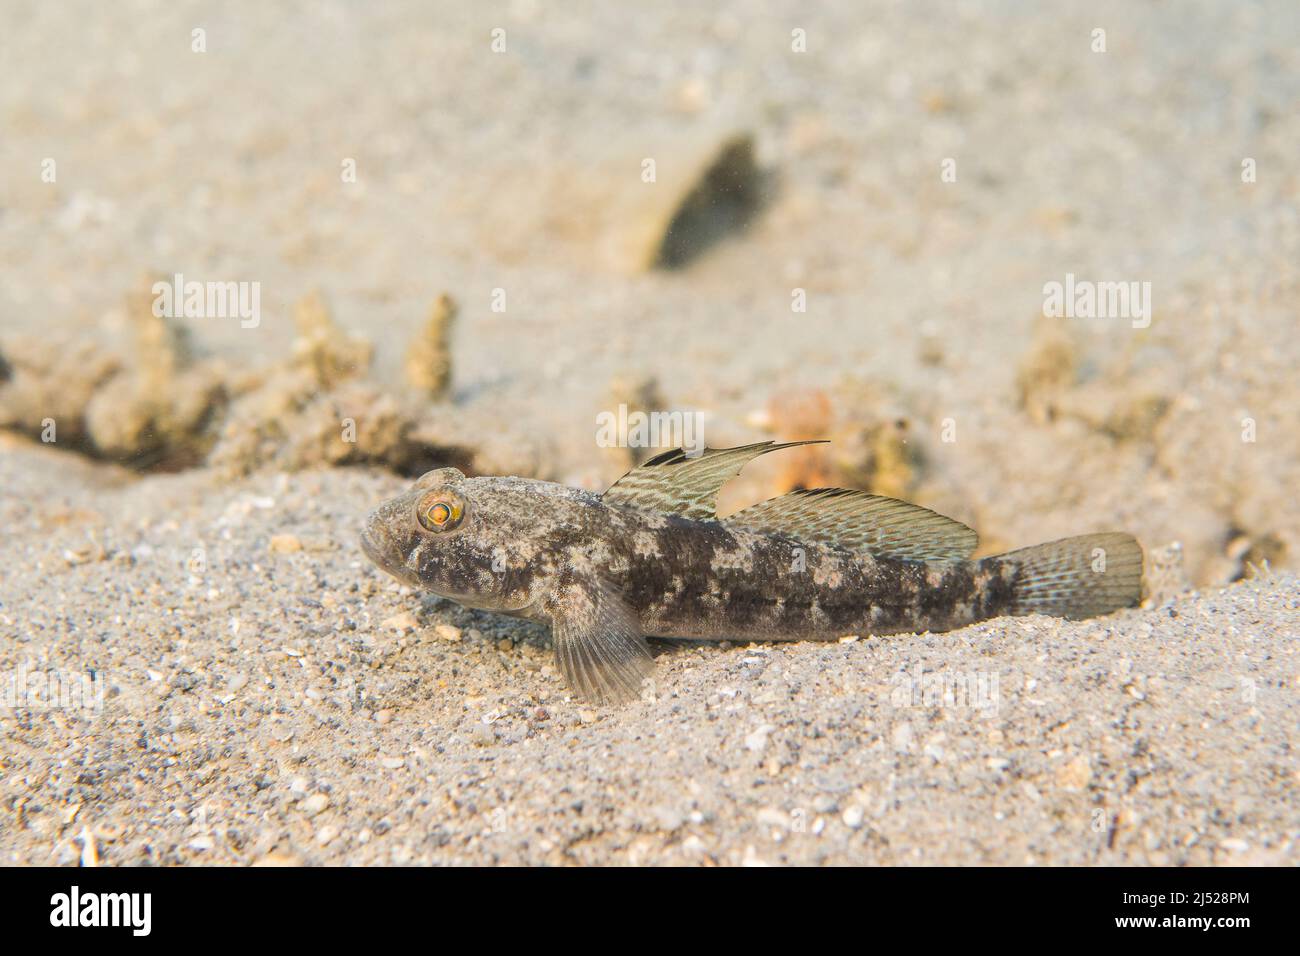 The black goby (Gobius niger) is a species of ray-finned fish found in the Eastern Atlantic and Mediterranean Sea and Black Sea. Stock Photo